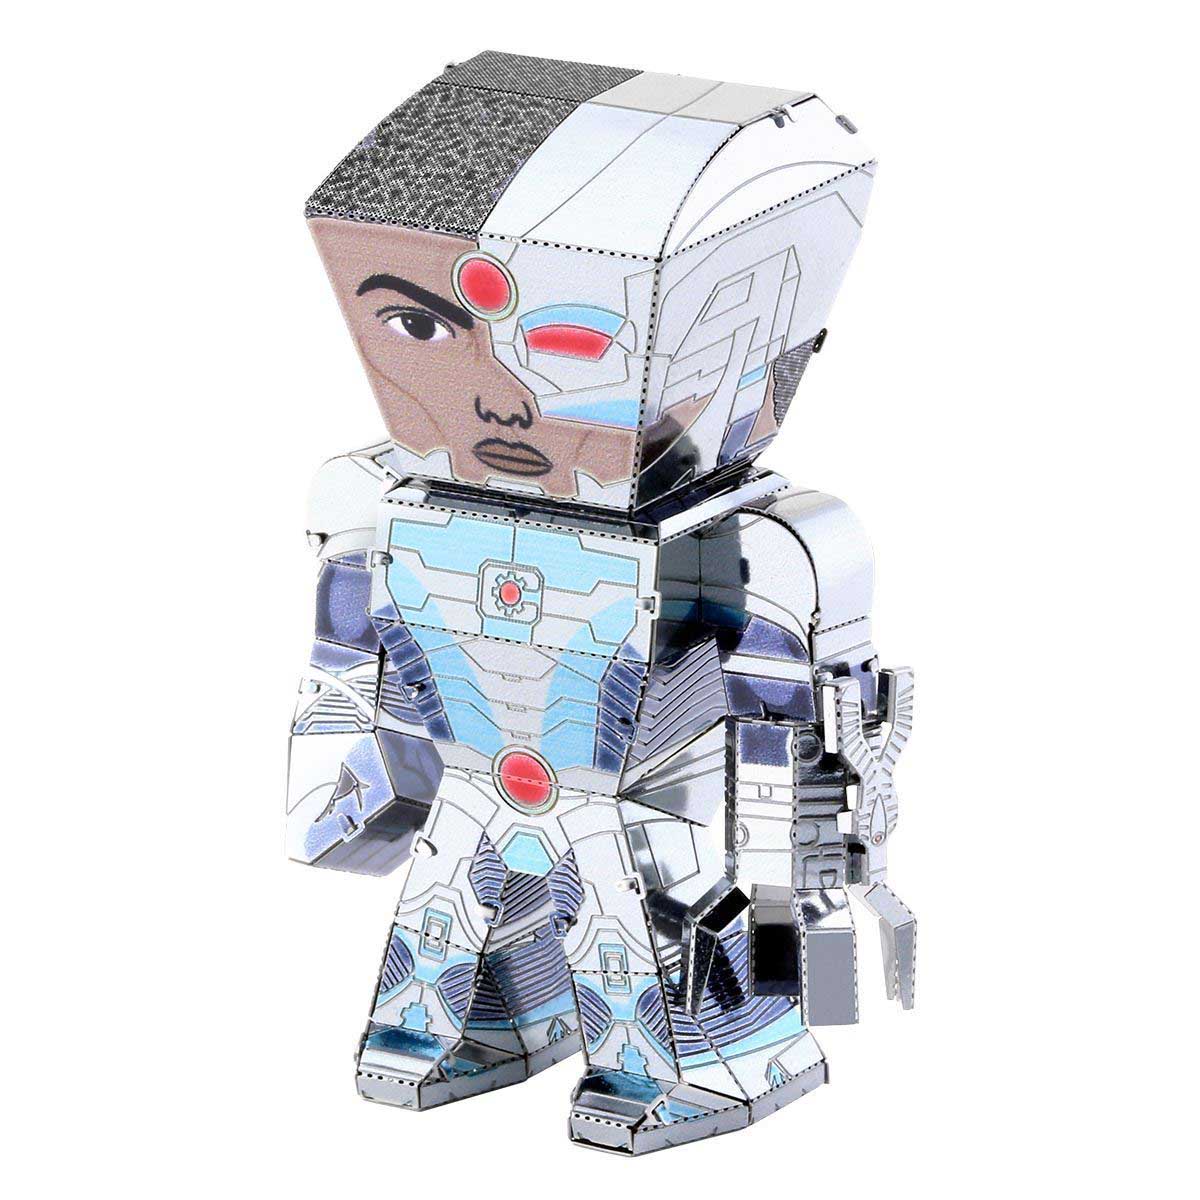 Does the cyborg puzzle save?